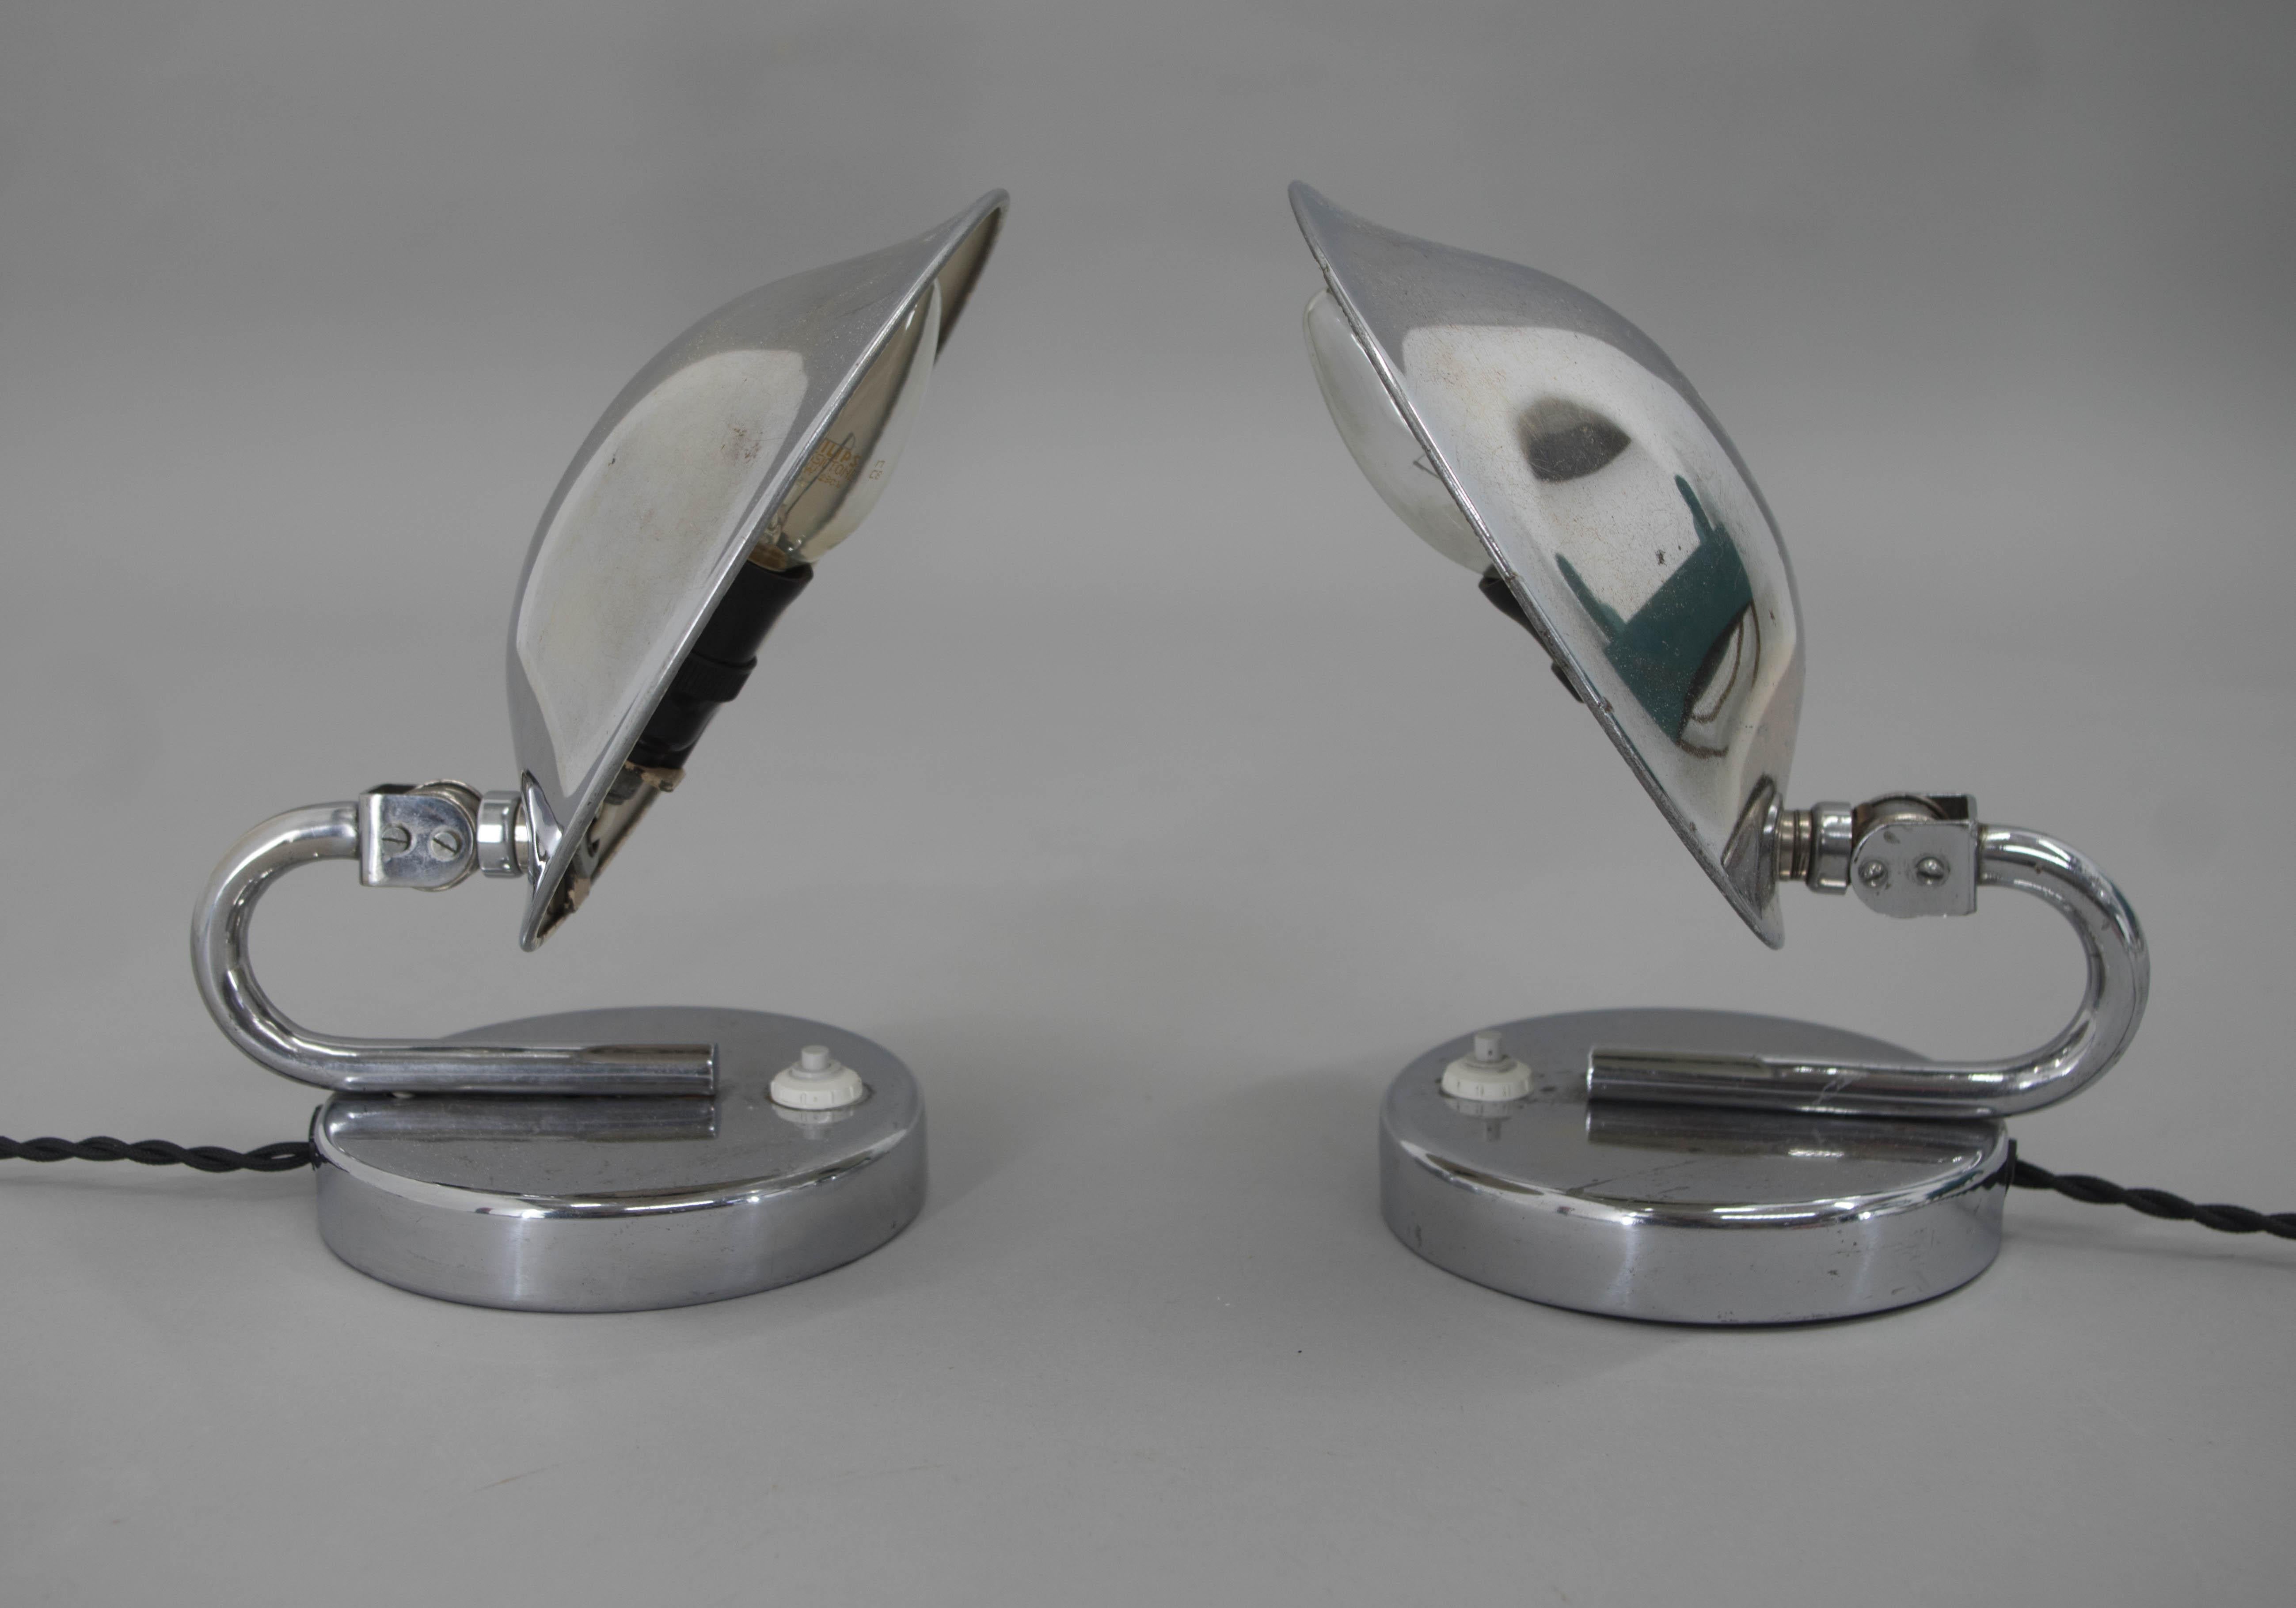 Set of two Functionalist/Bauhaus table or bedside lamps made by Napako in Czechoslovakia in 1930s. Adjustable shade.
Cleaned, rewired: 1x25W, E25-E27 bulbs
US plug adapter included